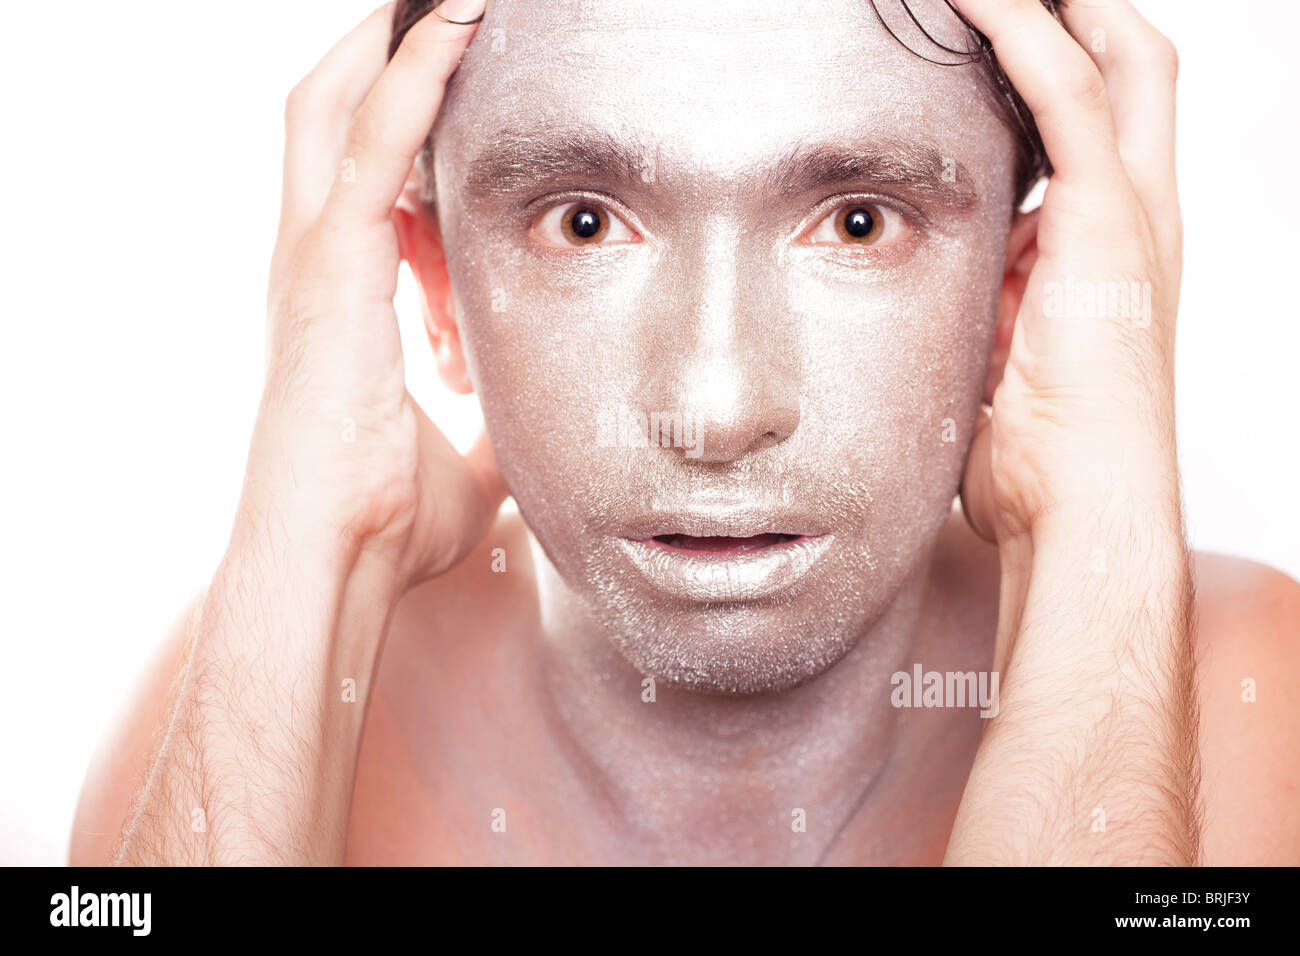 face of young man with frightened eyes and bronzed makeup close up Stock Photo